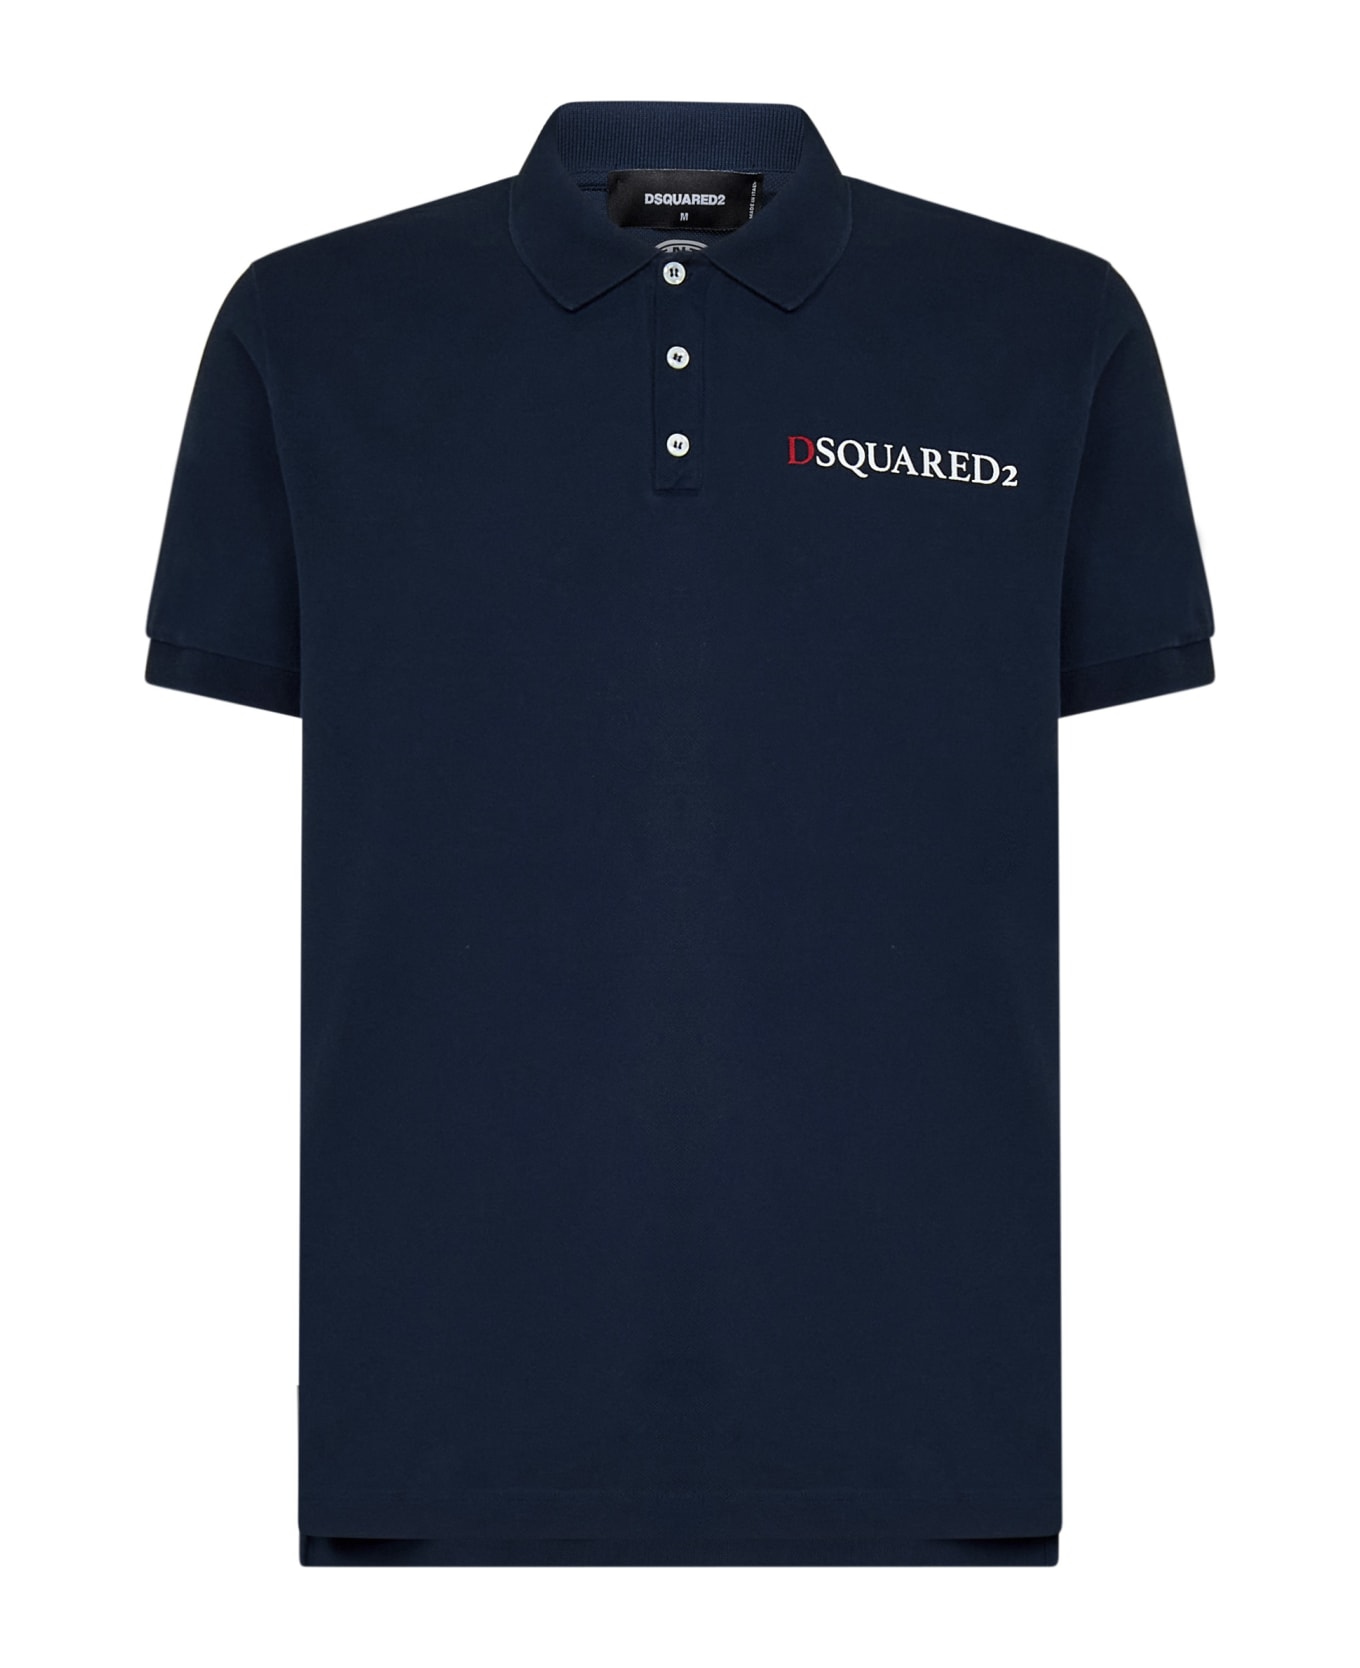 Dsquared2 Backdoor Access Tennis Fit Polo Shirt - Blue ポロシャツ